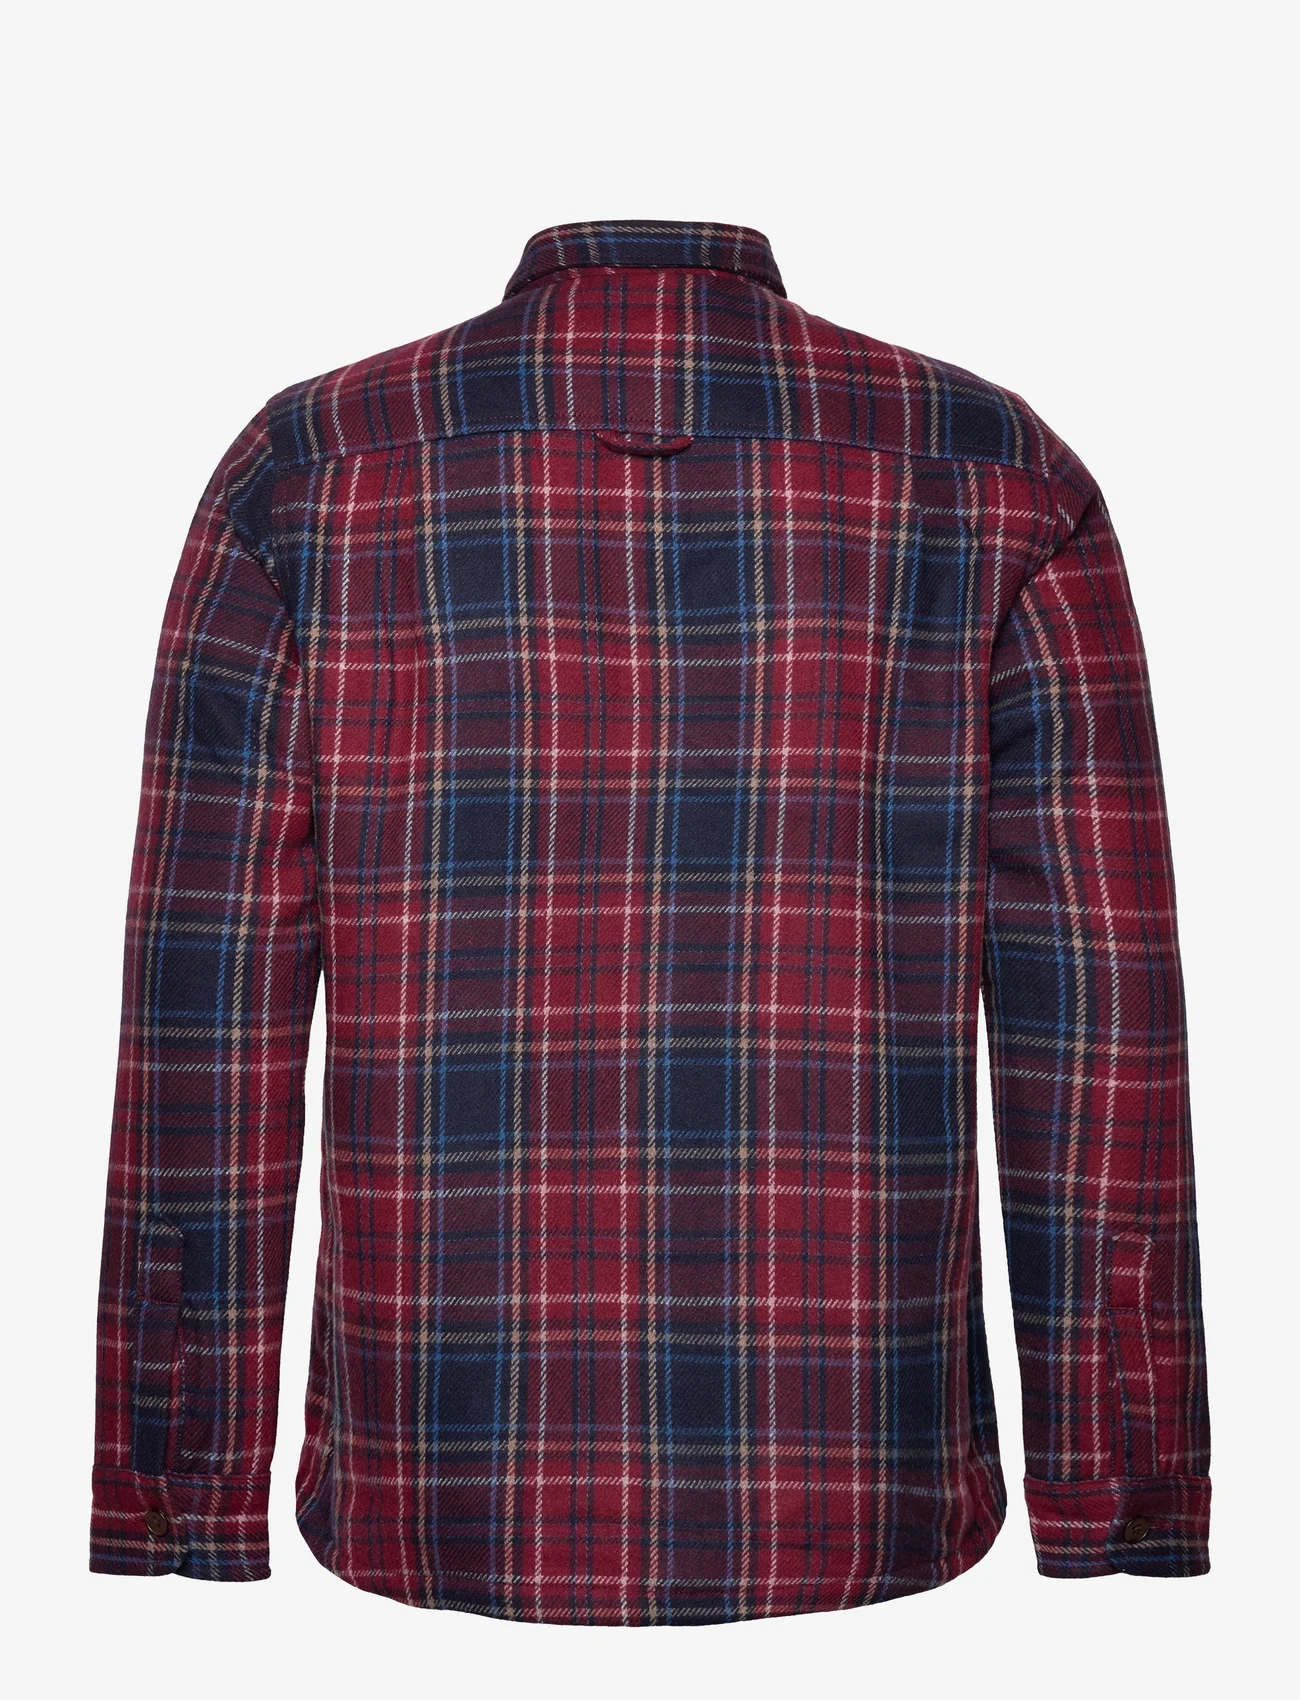 Superdry - MERCHANT QUILTED OVERSHIRT - overshirts - rhubarb red check - 1